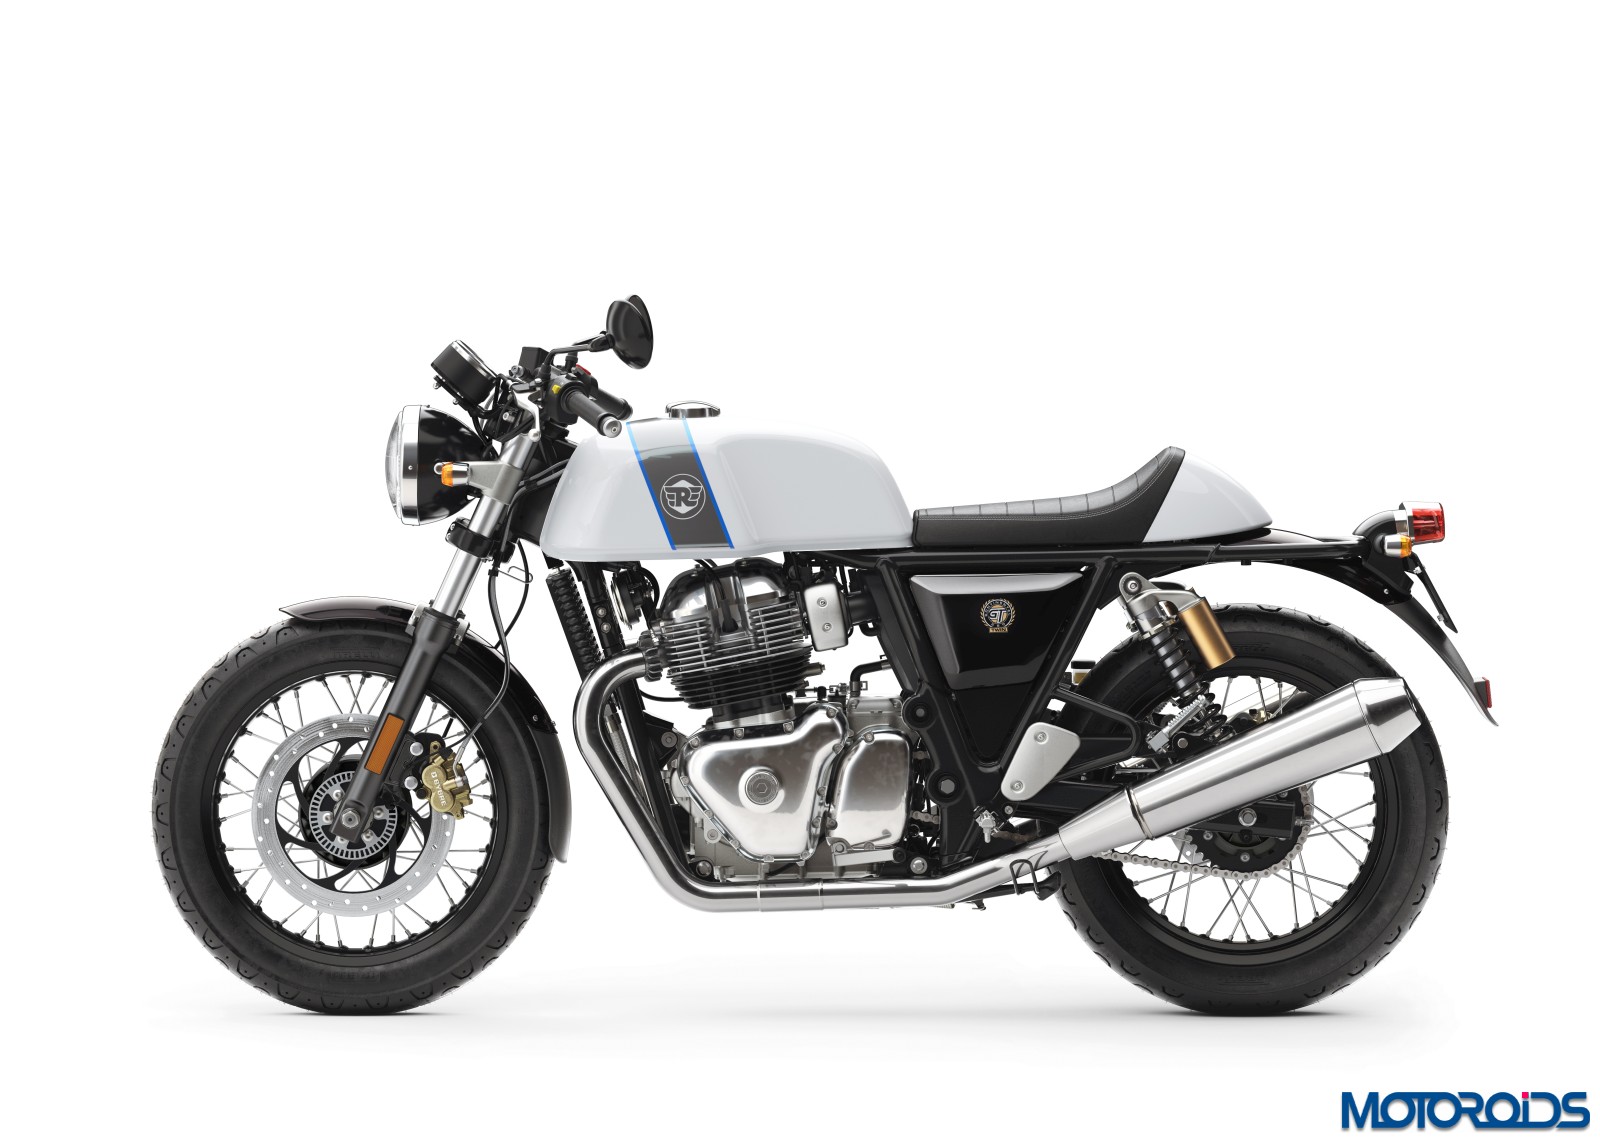 New 2018 Royal Enfield Continental Gt 650 Images Tech Specs Expected Price And India Launch Date Motoroids